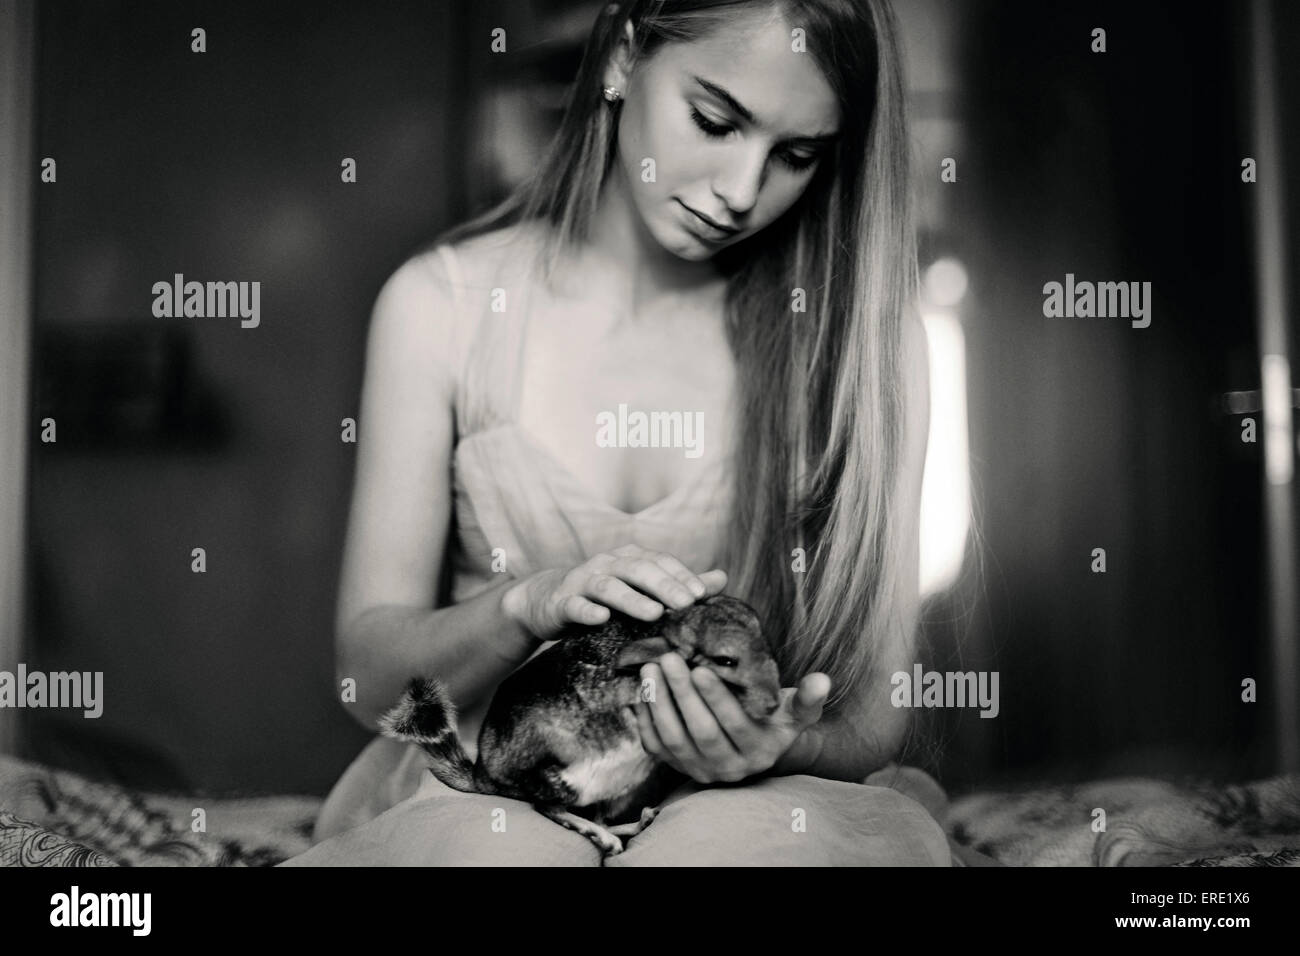 Caucasian girl holding pet chinchilla on bed Banque D'Images